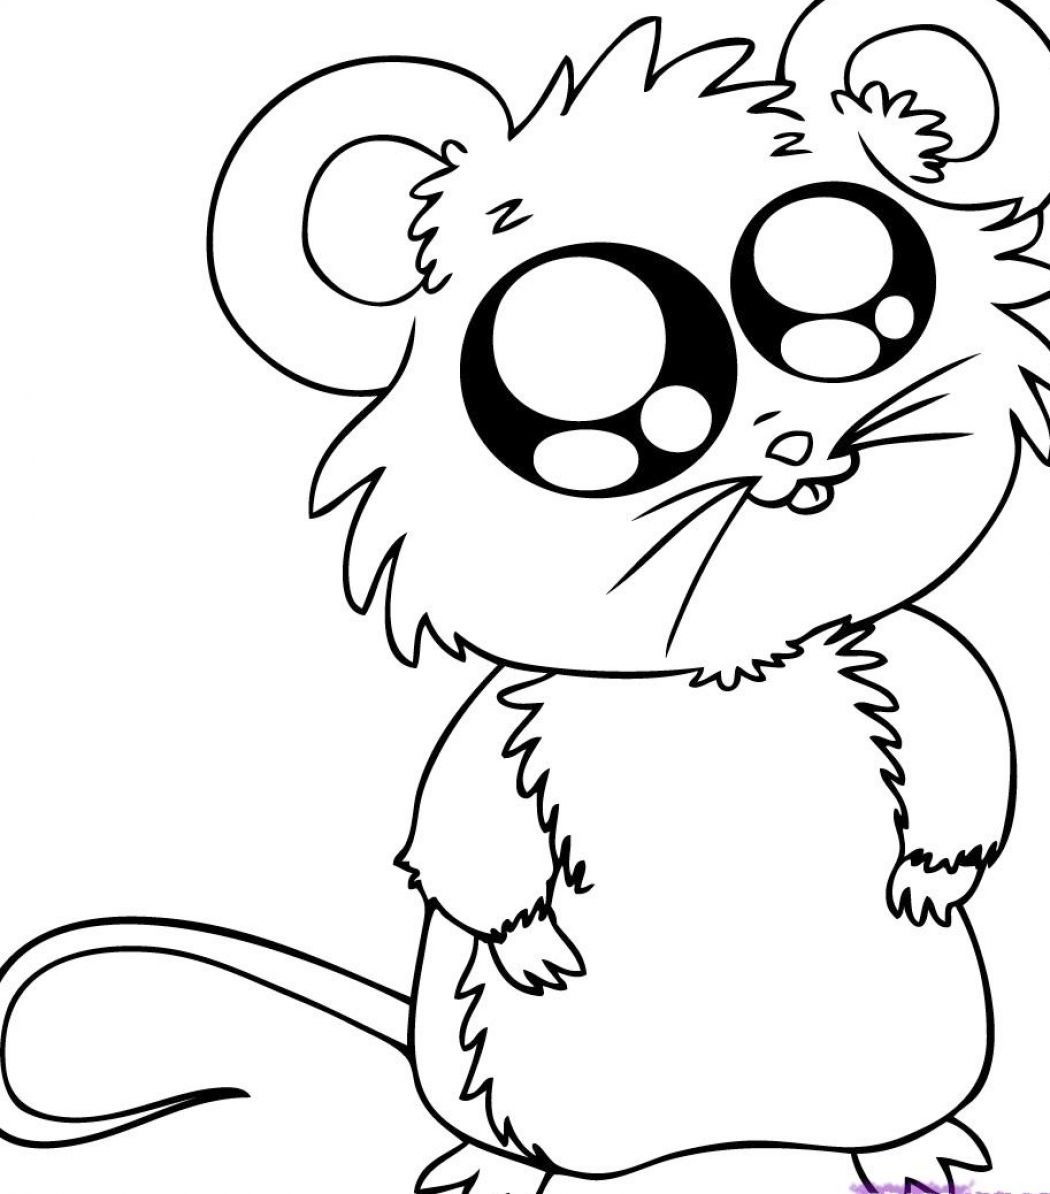 Cute Cartoon Animal - Coloring Pages for Kids and for Adults